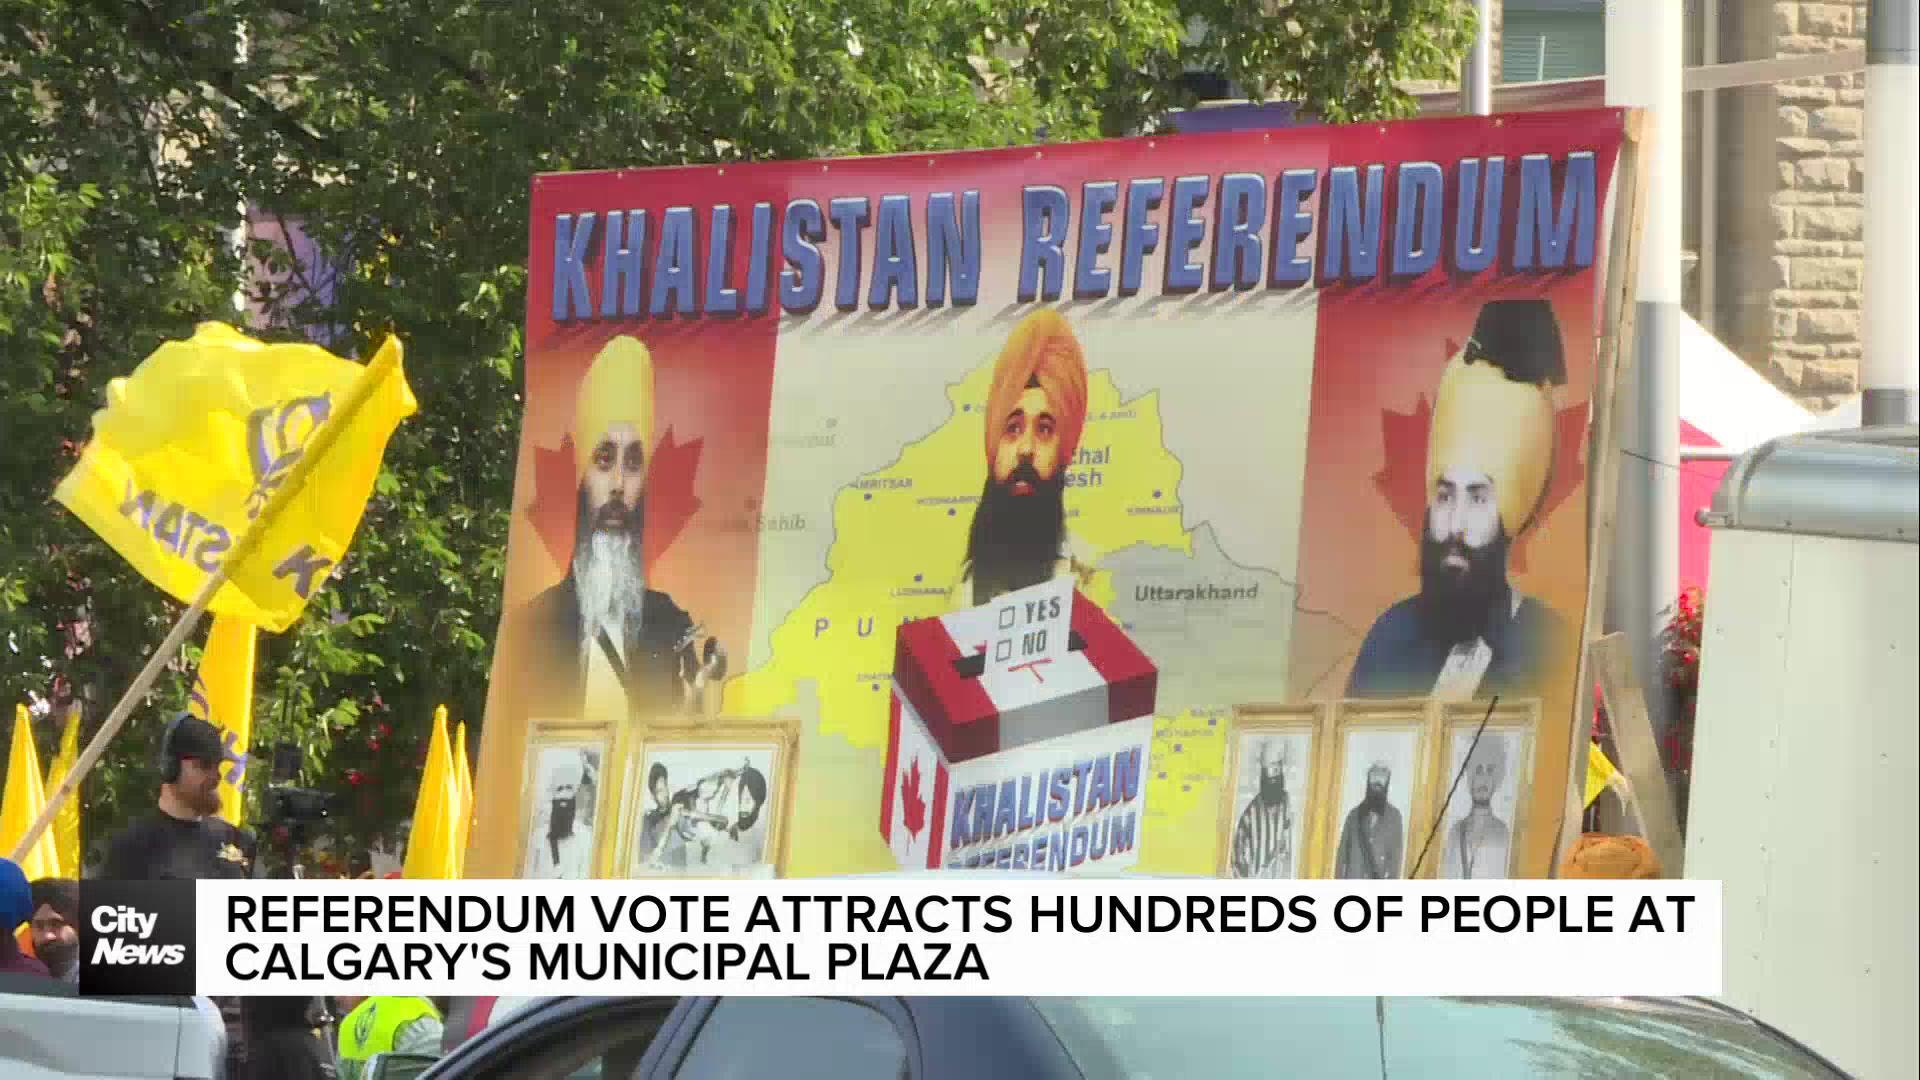 Referendum Vote attracts hundreds of people at Calgary's Municipal Plaza